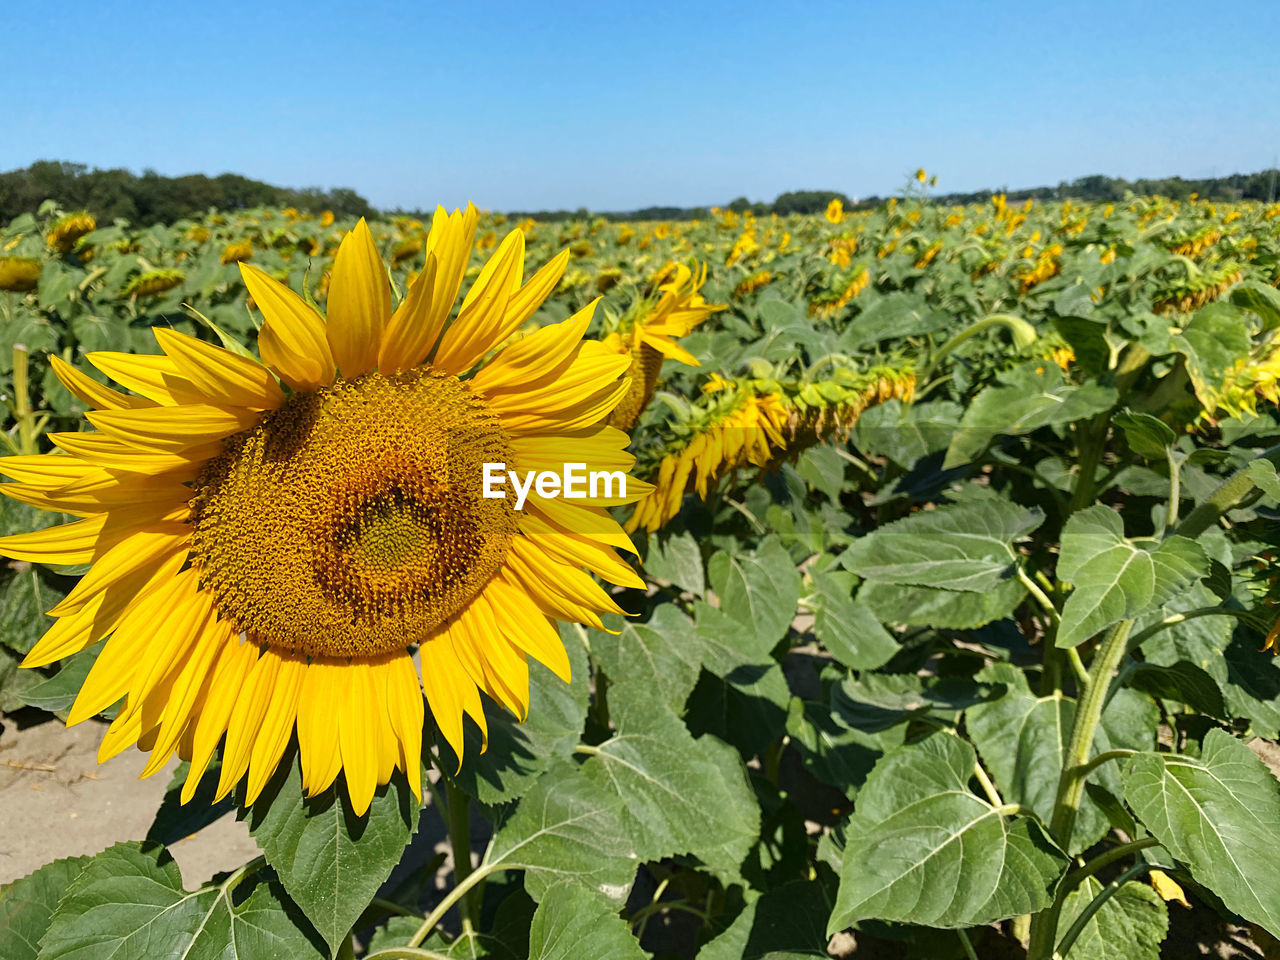 sunflower, plant, flower, flowering plant, yellow, landscape, beauty in nature, sky, flower head, freshness, nature, growth, field, rural scene, land, agriculture, inflorescence, sunflower seed, petal, environment, clear sky, leaf, plant part, crop, farm, no people, scenics - nature, fragility, sunny, summer, sunlight, abundance, blue, horizon over land, horizon, day, springtime, outdoors, vibrant color, asterales, botany, close-up, tranquility, cloud, blossom, green, urban skyline, pollen, idyllic, non-urban scene, travel, travel destinations, copy space, food and drink, food, landscaped